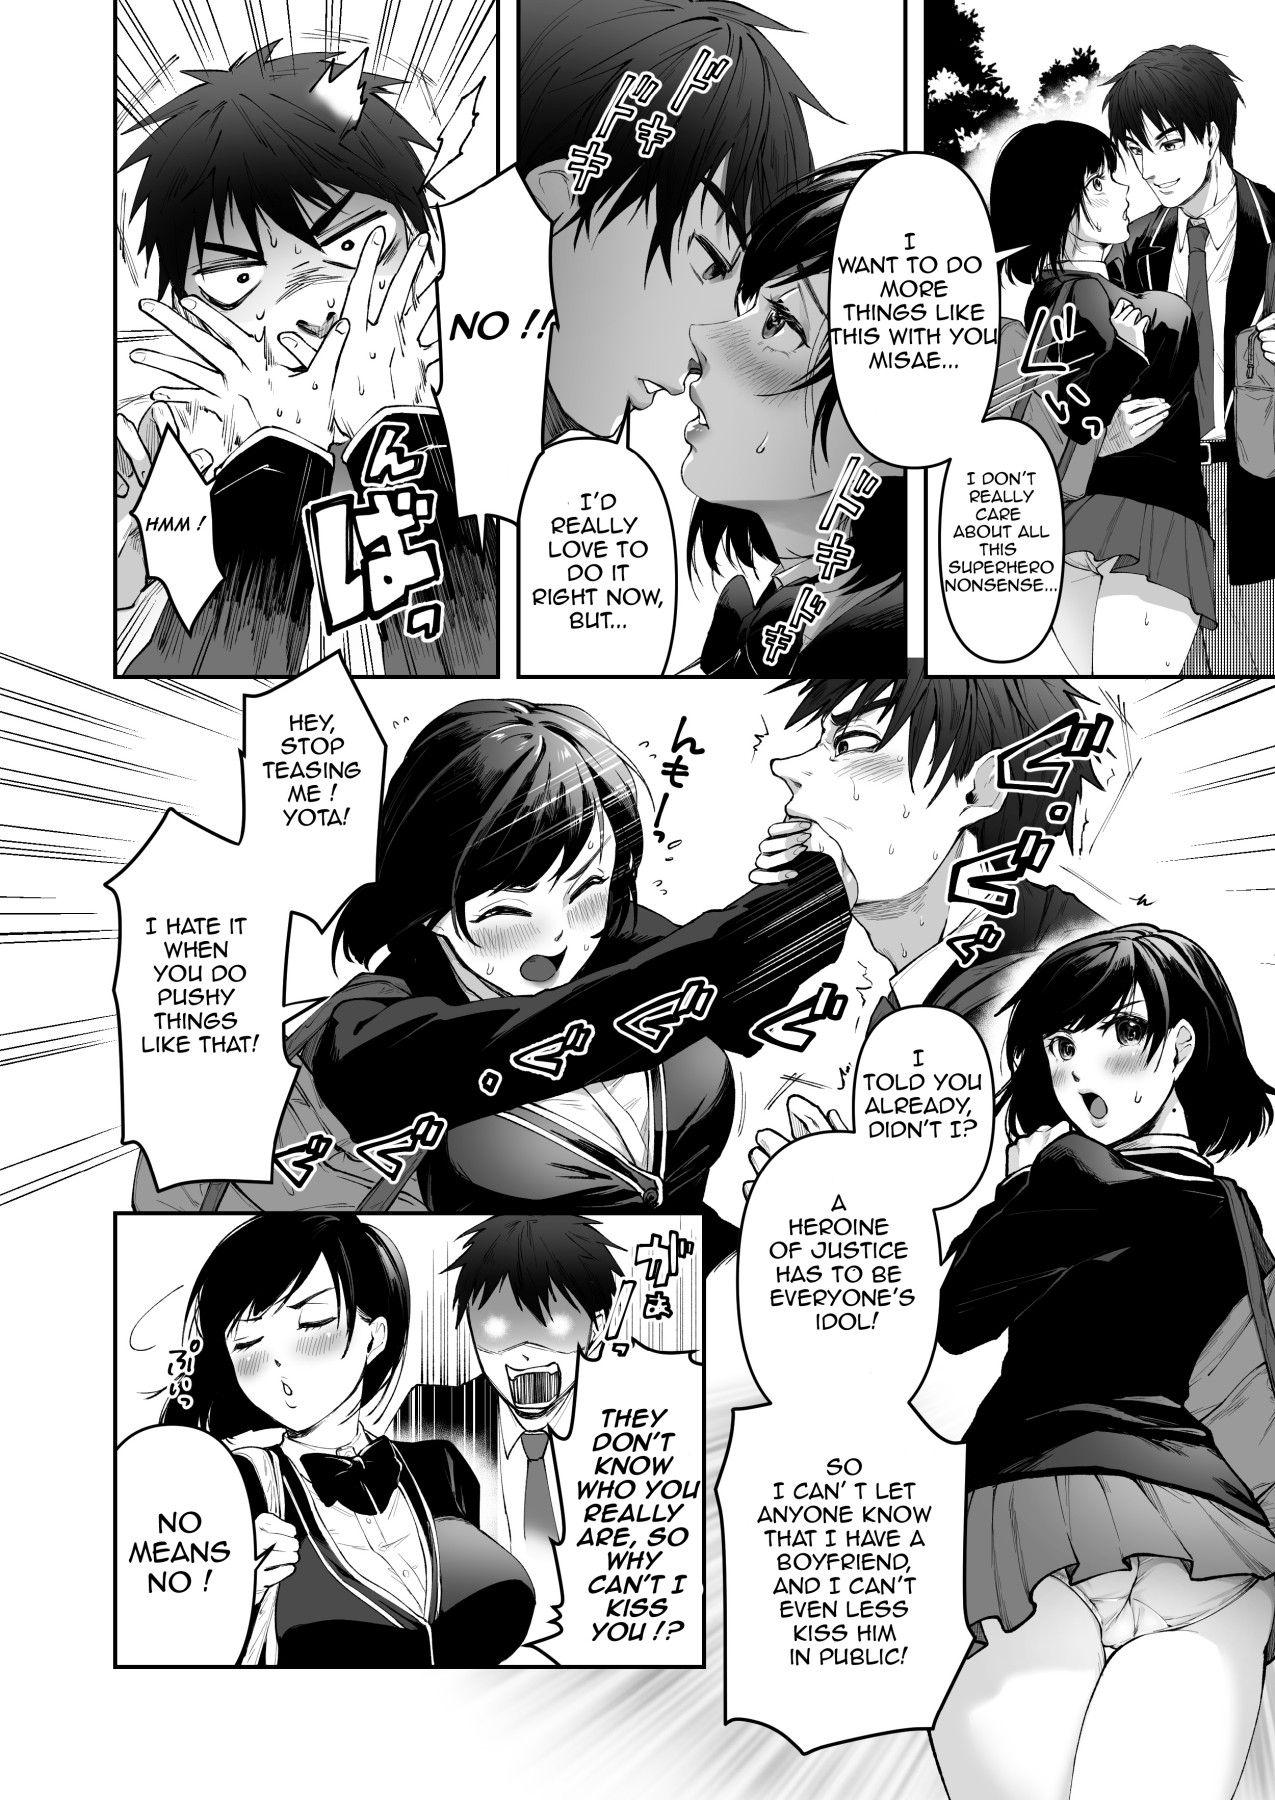 Hentai Manga Comic-How To Make a Champion of Justice Fall-Read-2